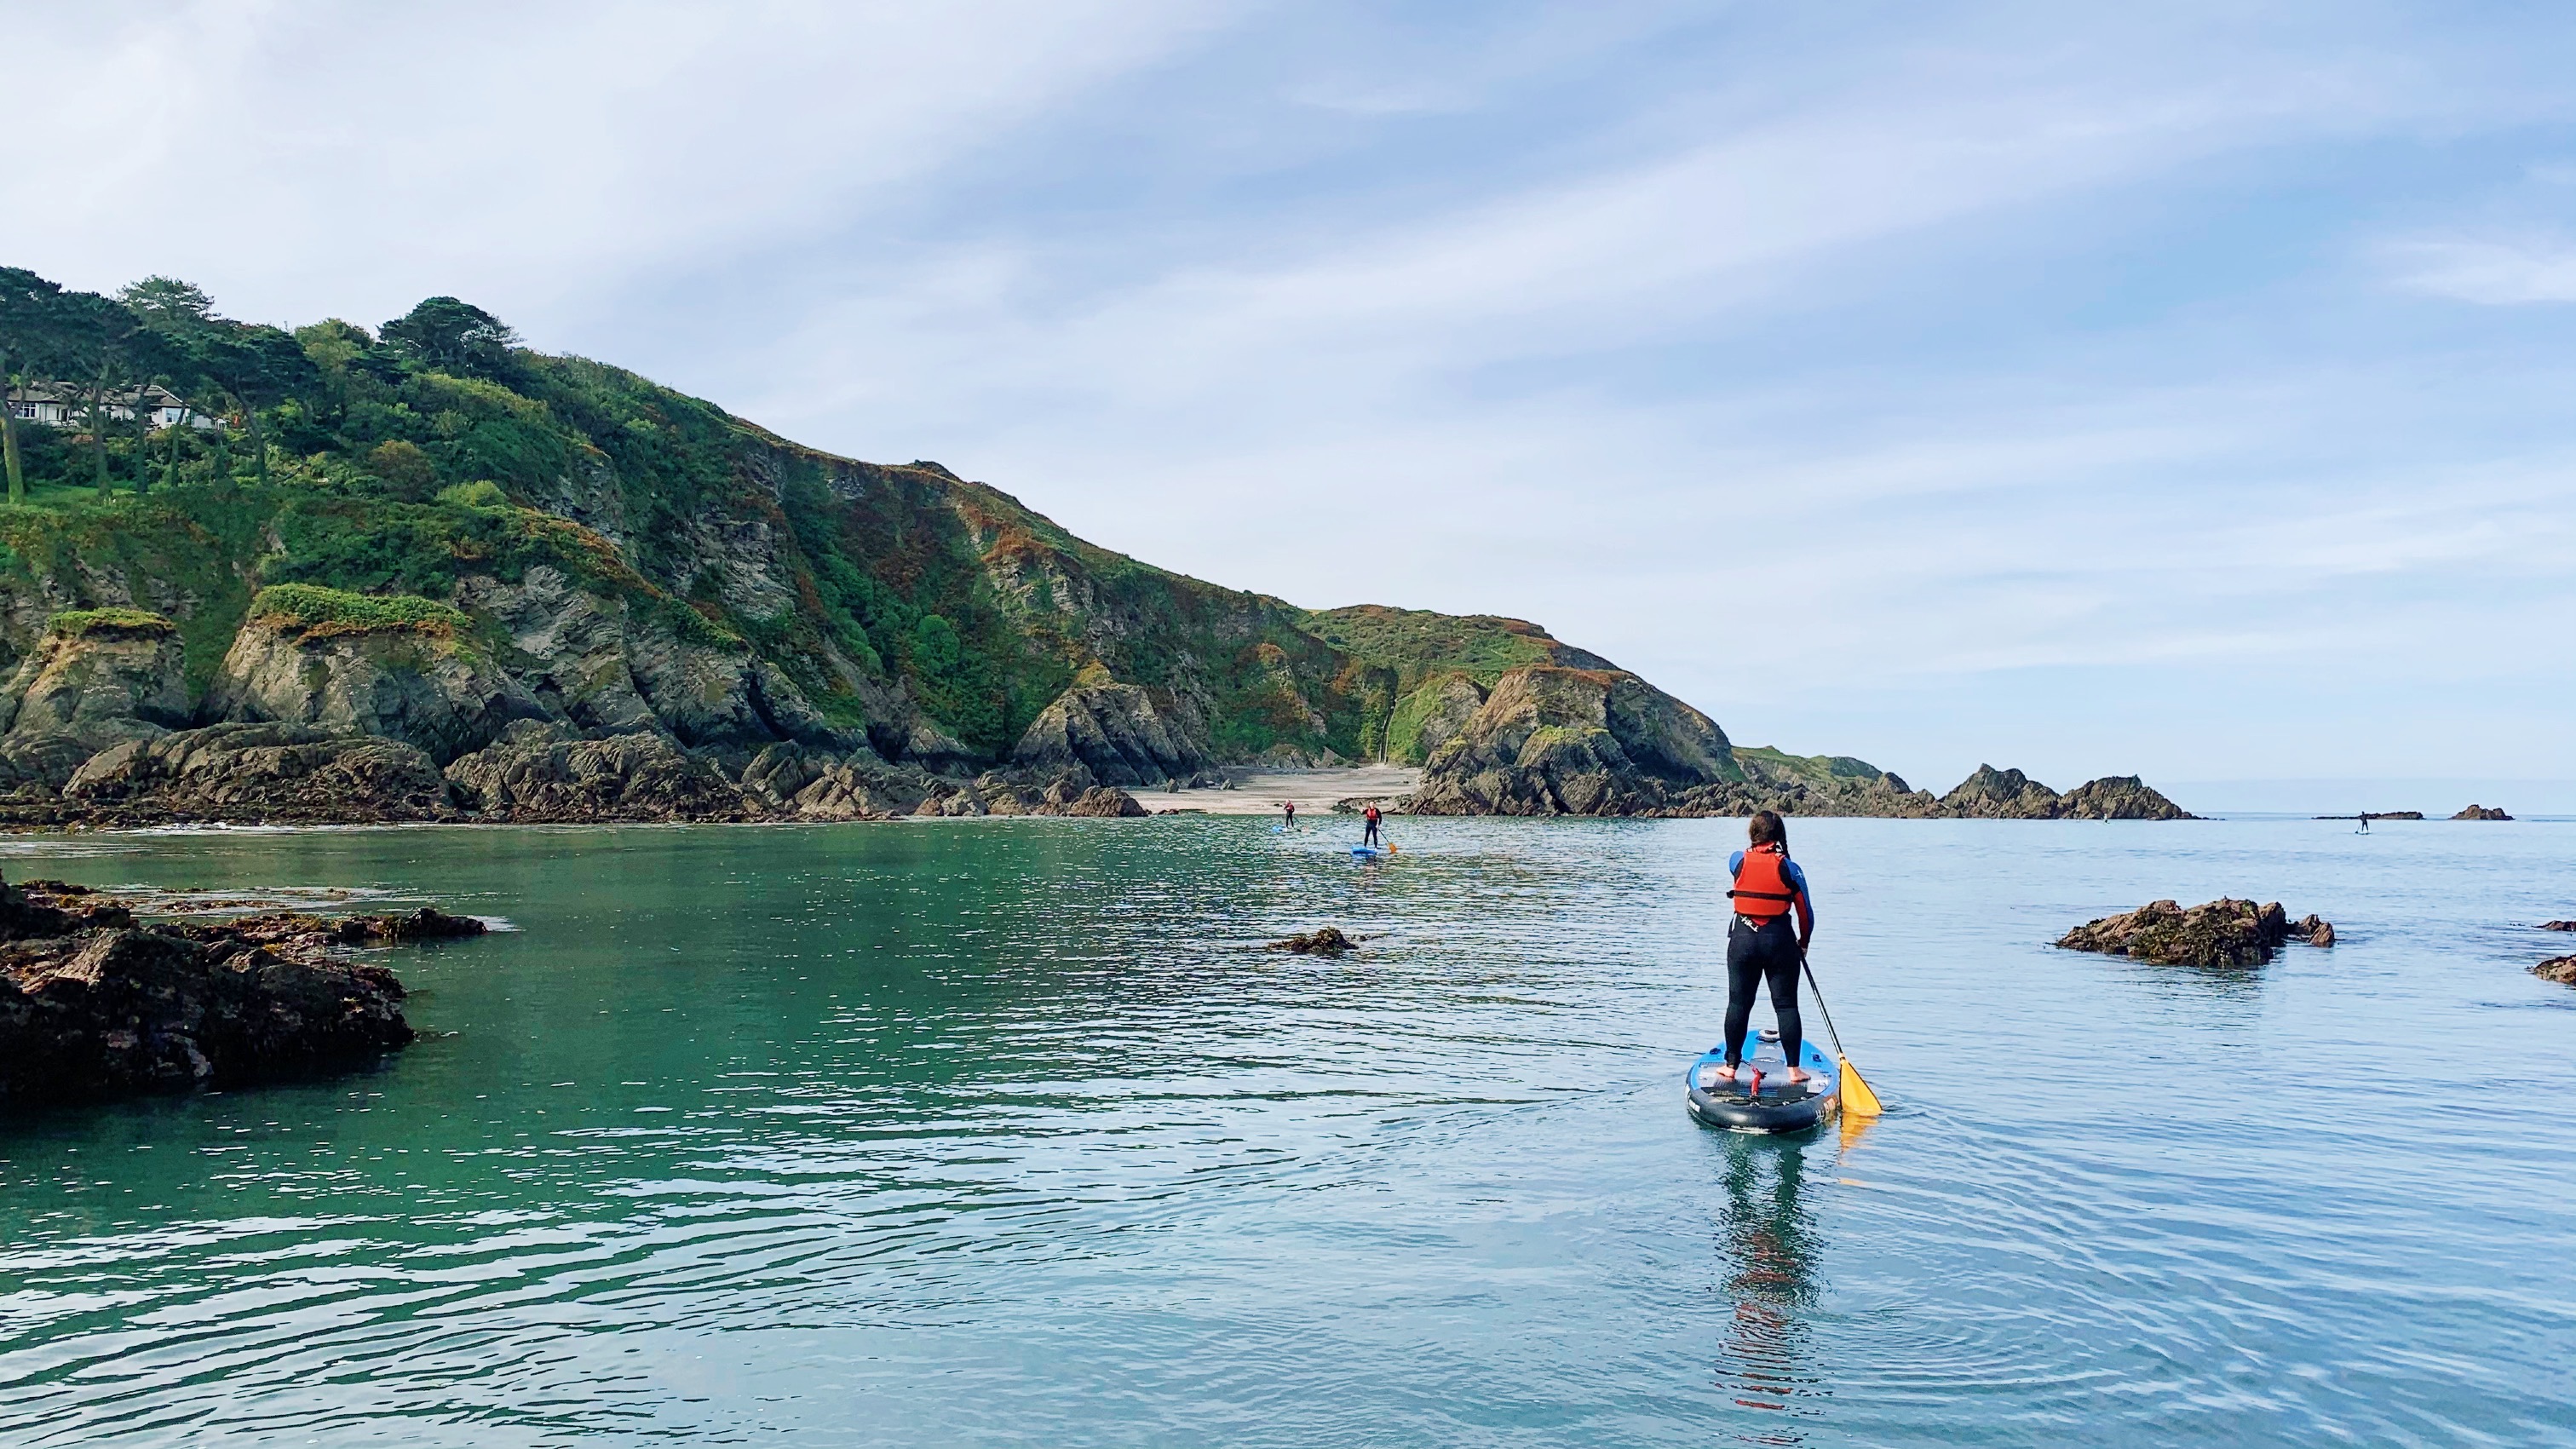 paddleboarding near me, sup, stand up paddleboarding, lee bay, north devon